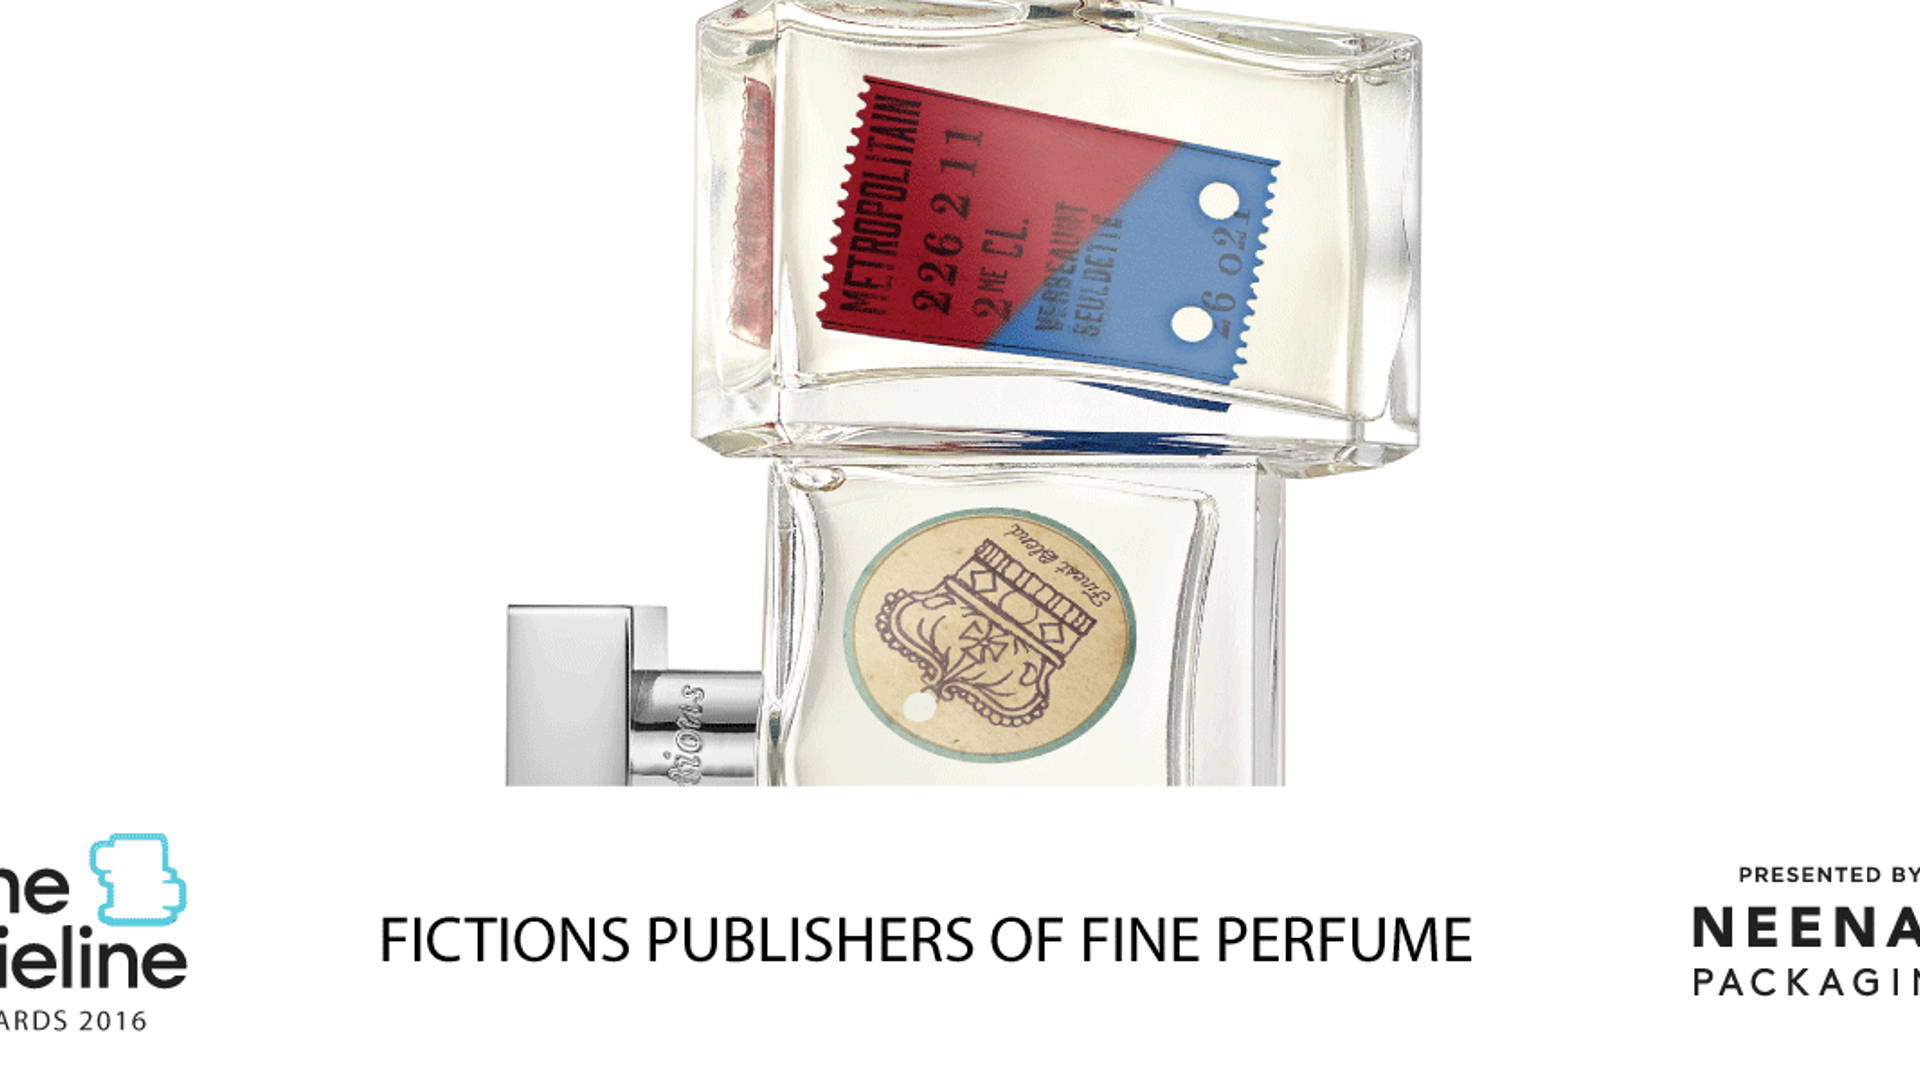 Featured image for The Dieline Awards 2016 Outstanding Achievements: Fictions Publishers of Fine Perfume